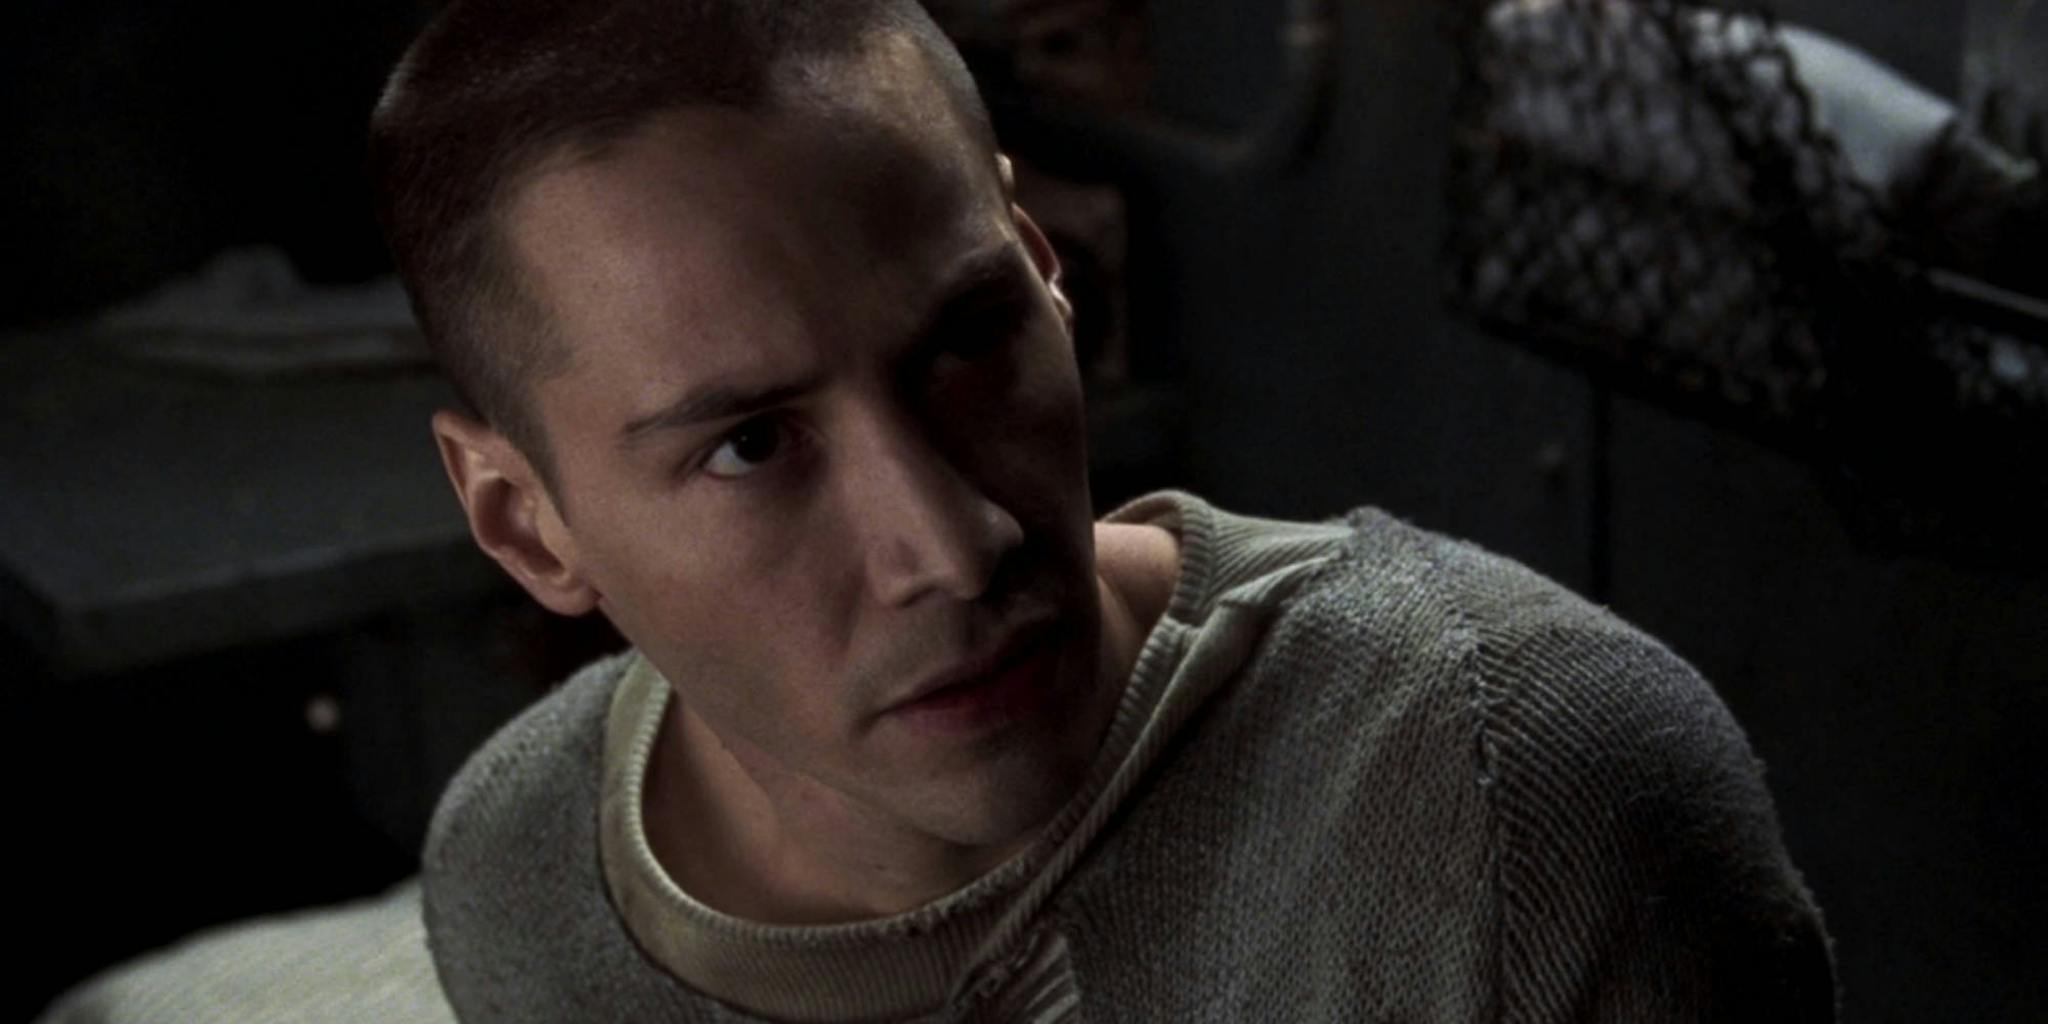 This week in streaming: ‘The Matrix’ is a great sweater movie